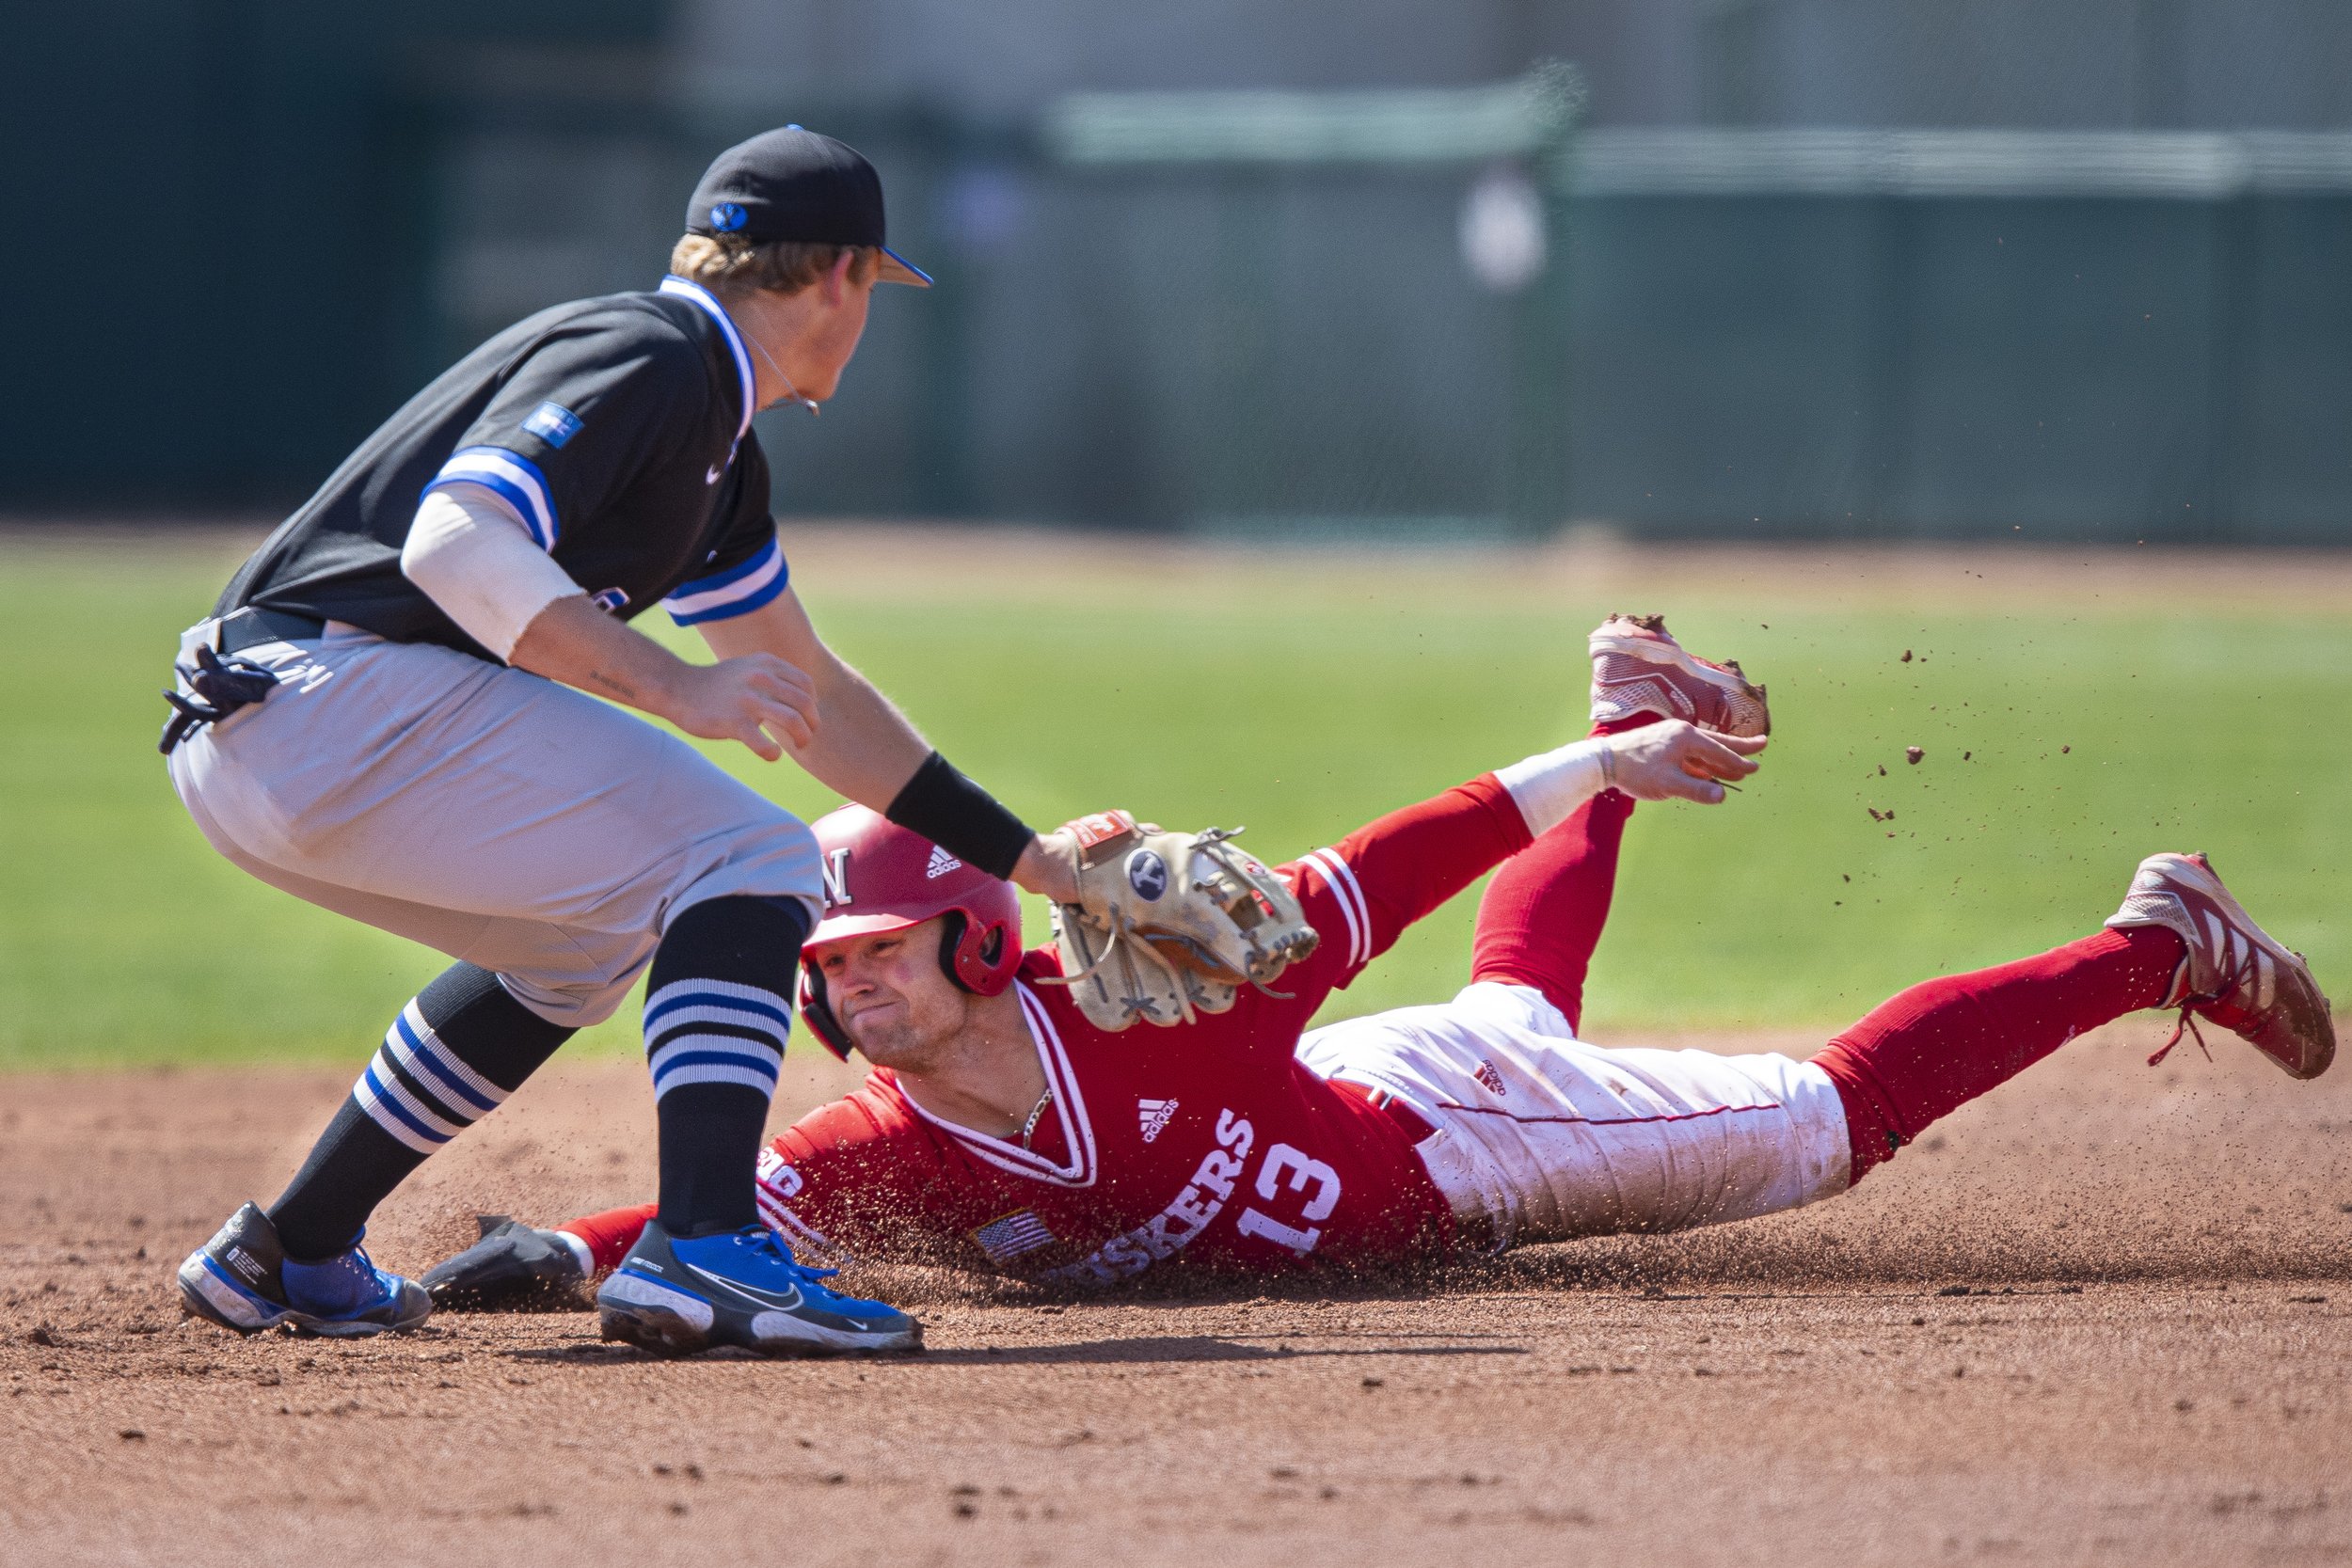  Nebraska baserunner Cam Chick is tagged out by BYU second basemen Ozzie Pratt while attempting to steal  second base during the third inning at Haymarket Park on April 16, 2022, in Lincoln, Nebraska 